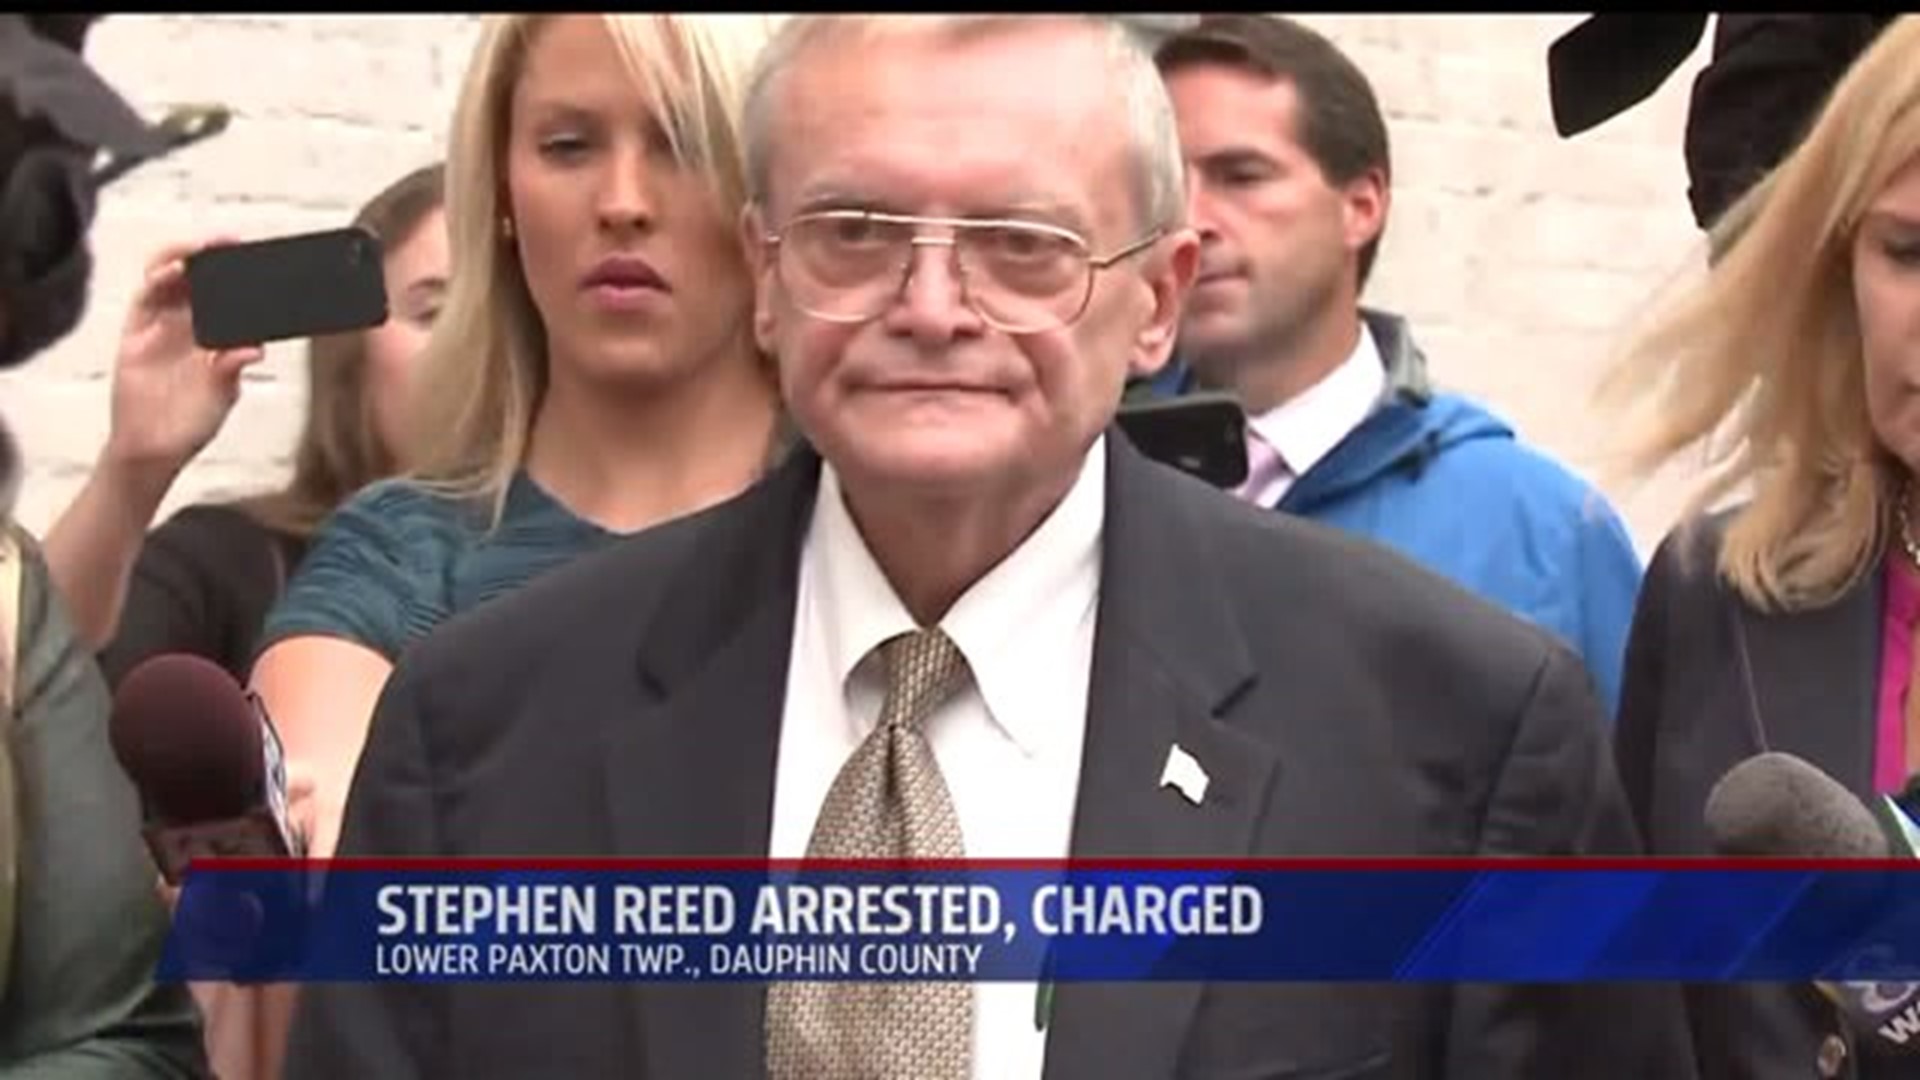 Attorney General Kane says Reed charges one of the most disturbing cases of public corruption